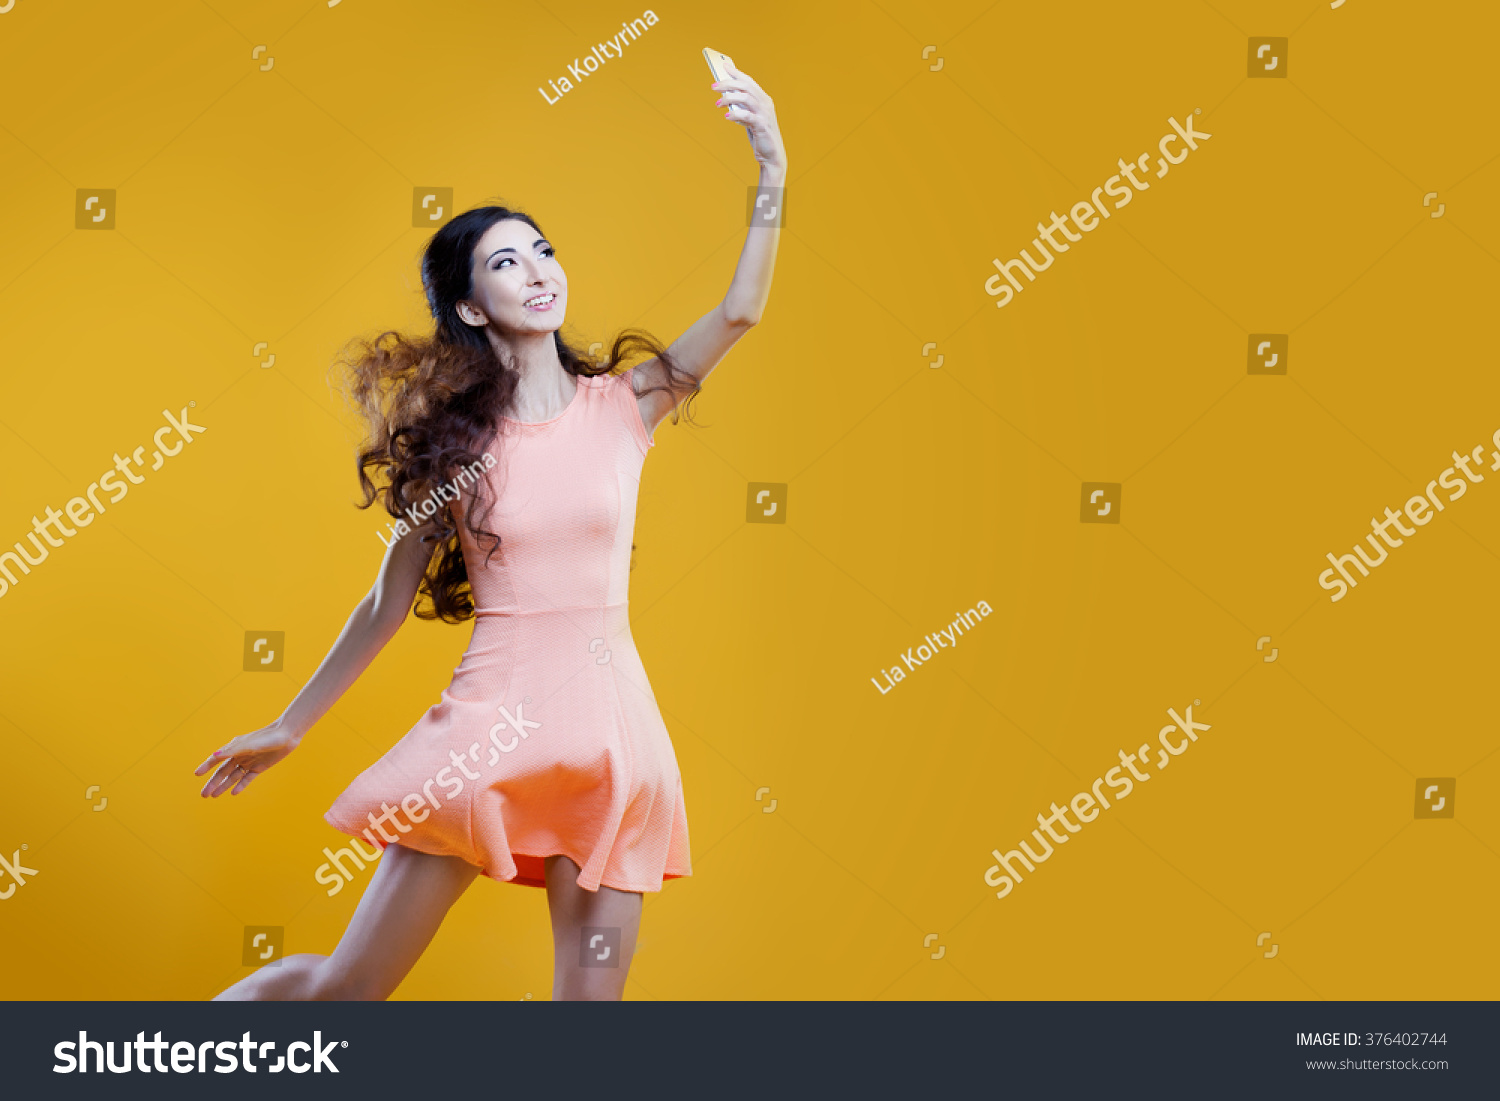 Fashion asian young  girl   taking picture of herself, selfie. Yellow background. place for your text on the right #376402744